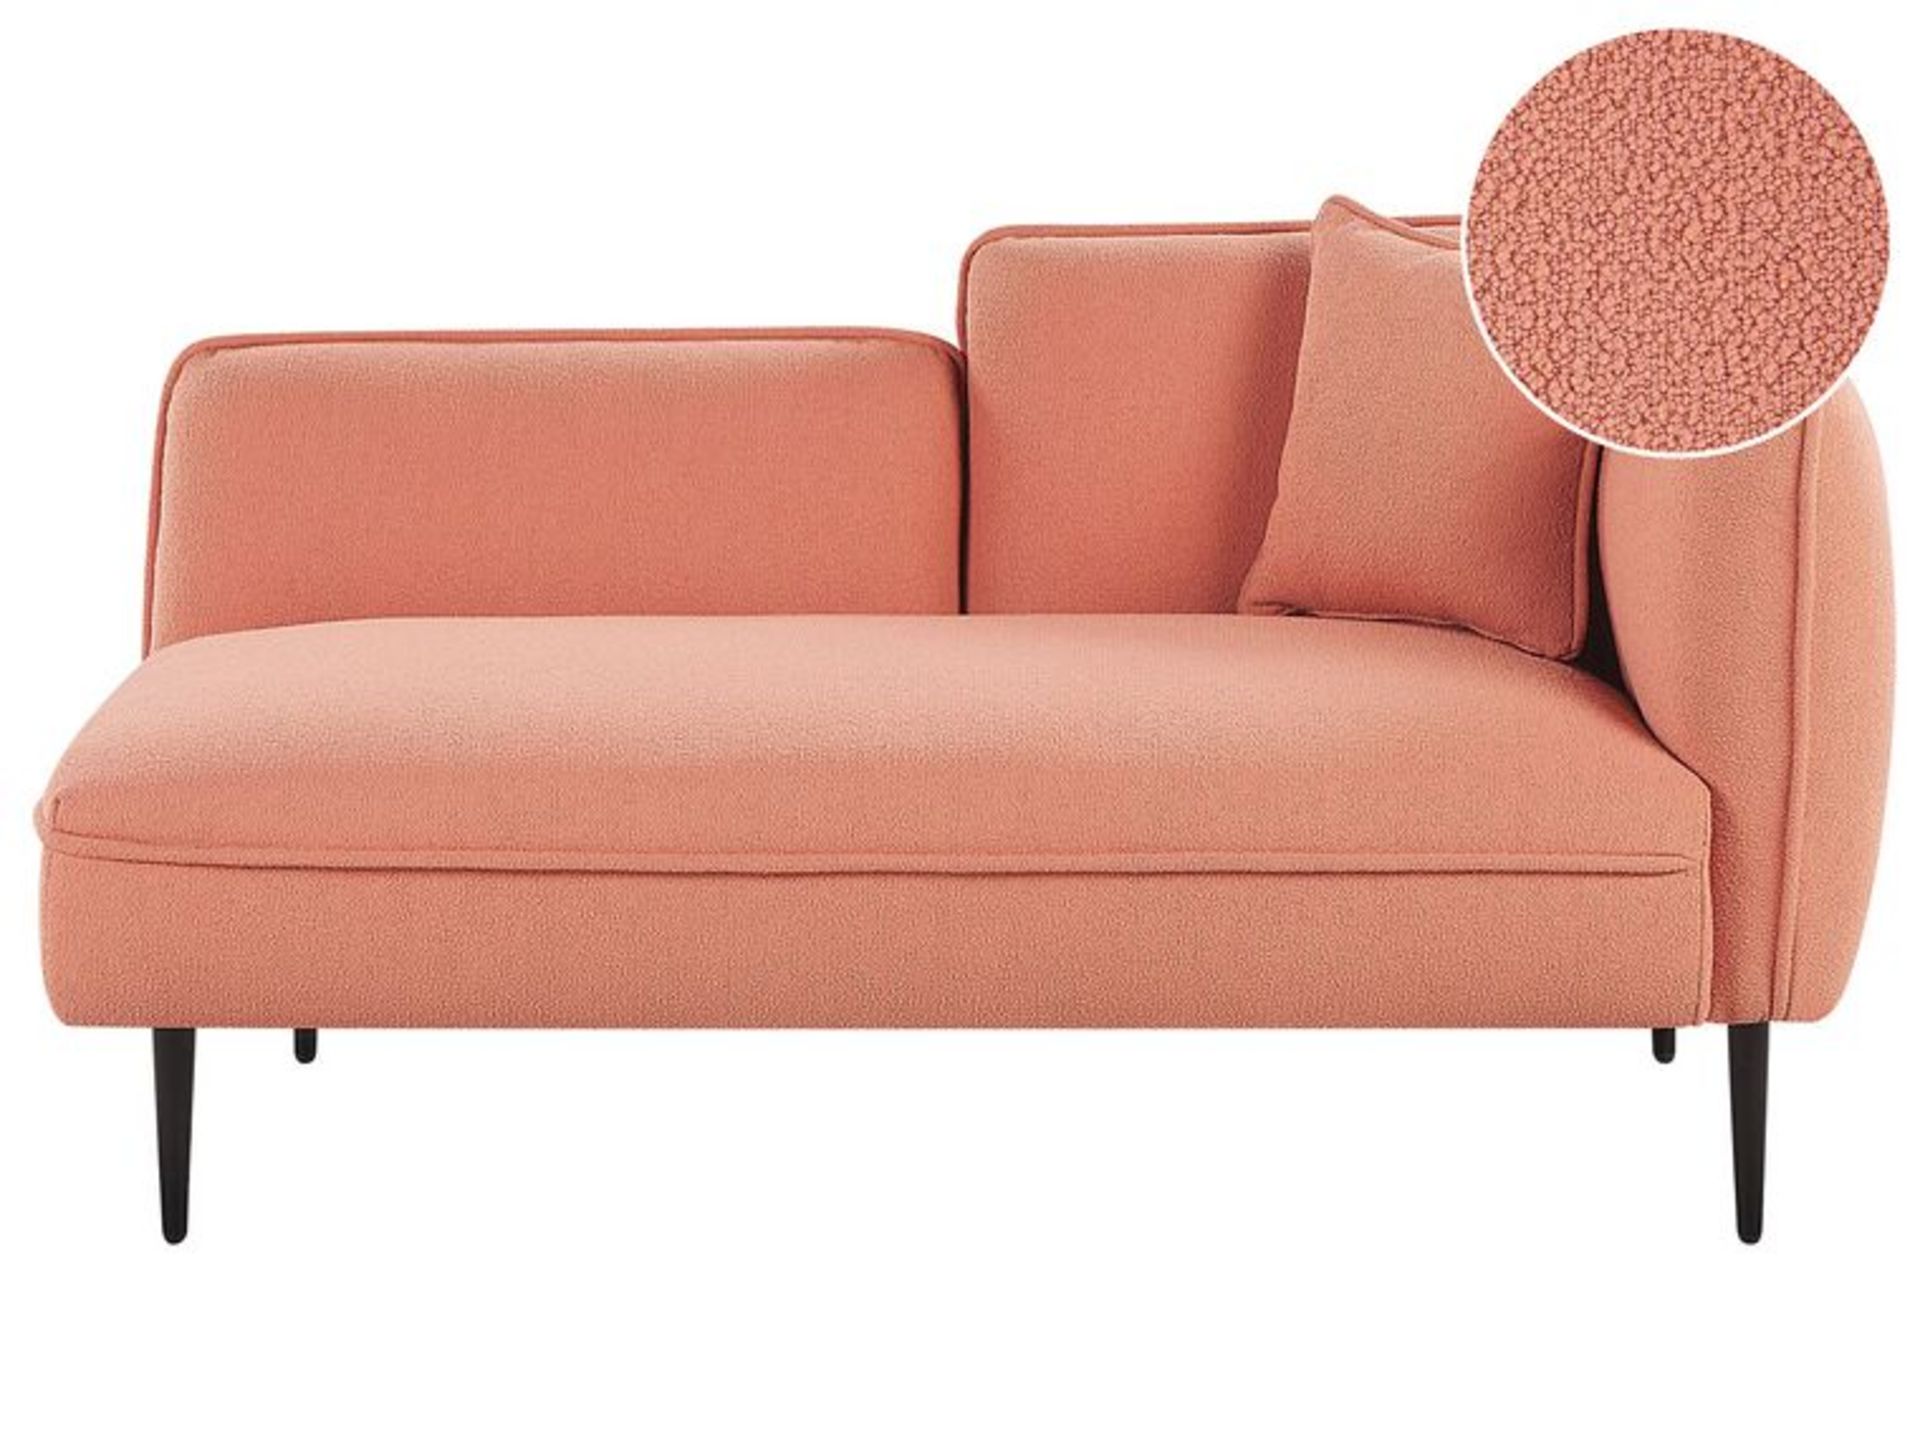 Chevannes Right Hand Boucle Chaise Lounge Peach Pink. - R14.1. - RRP £649.00. T - Image 2 of 2